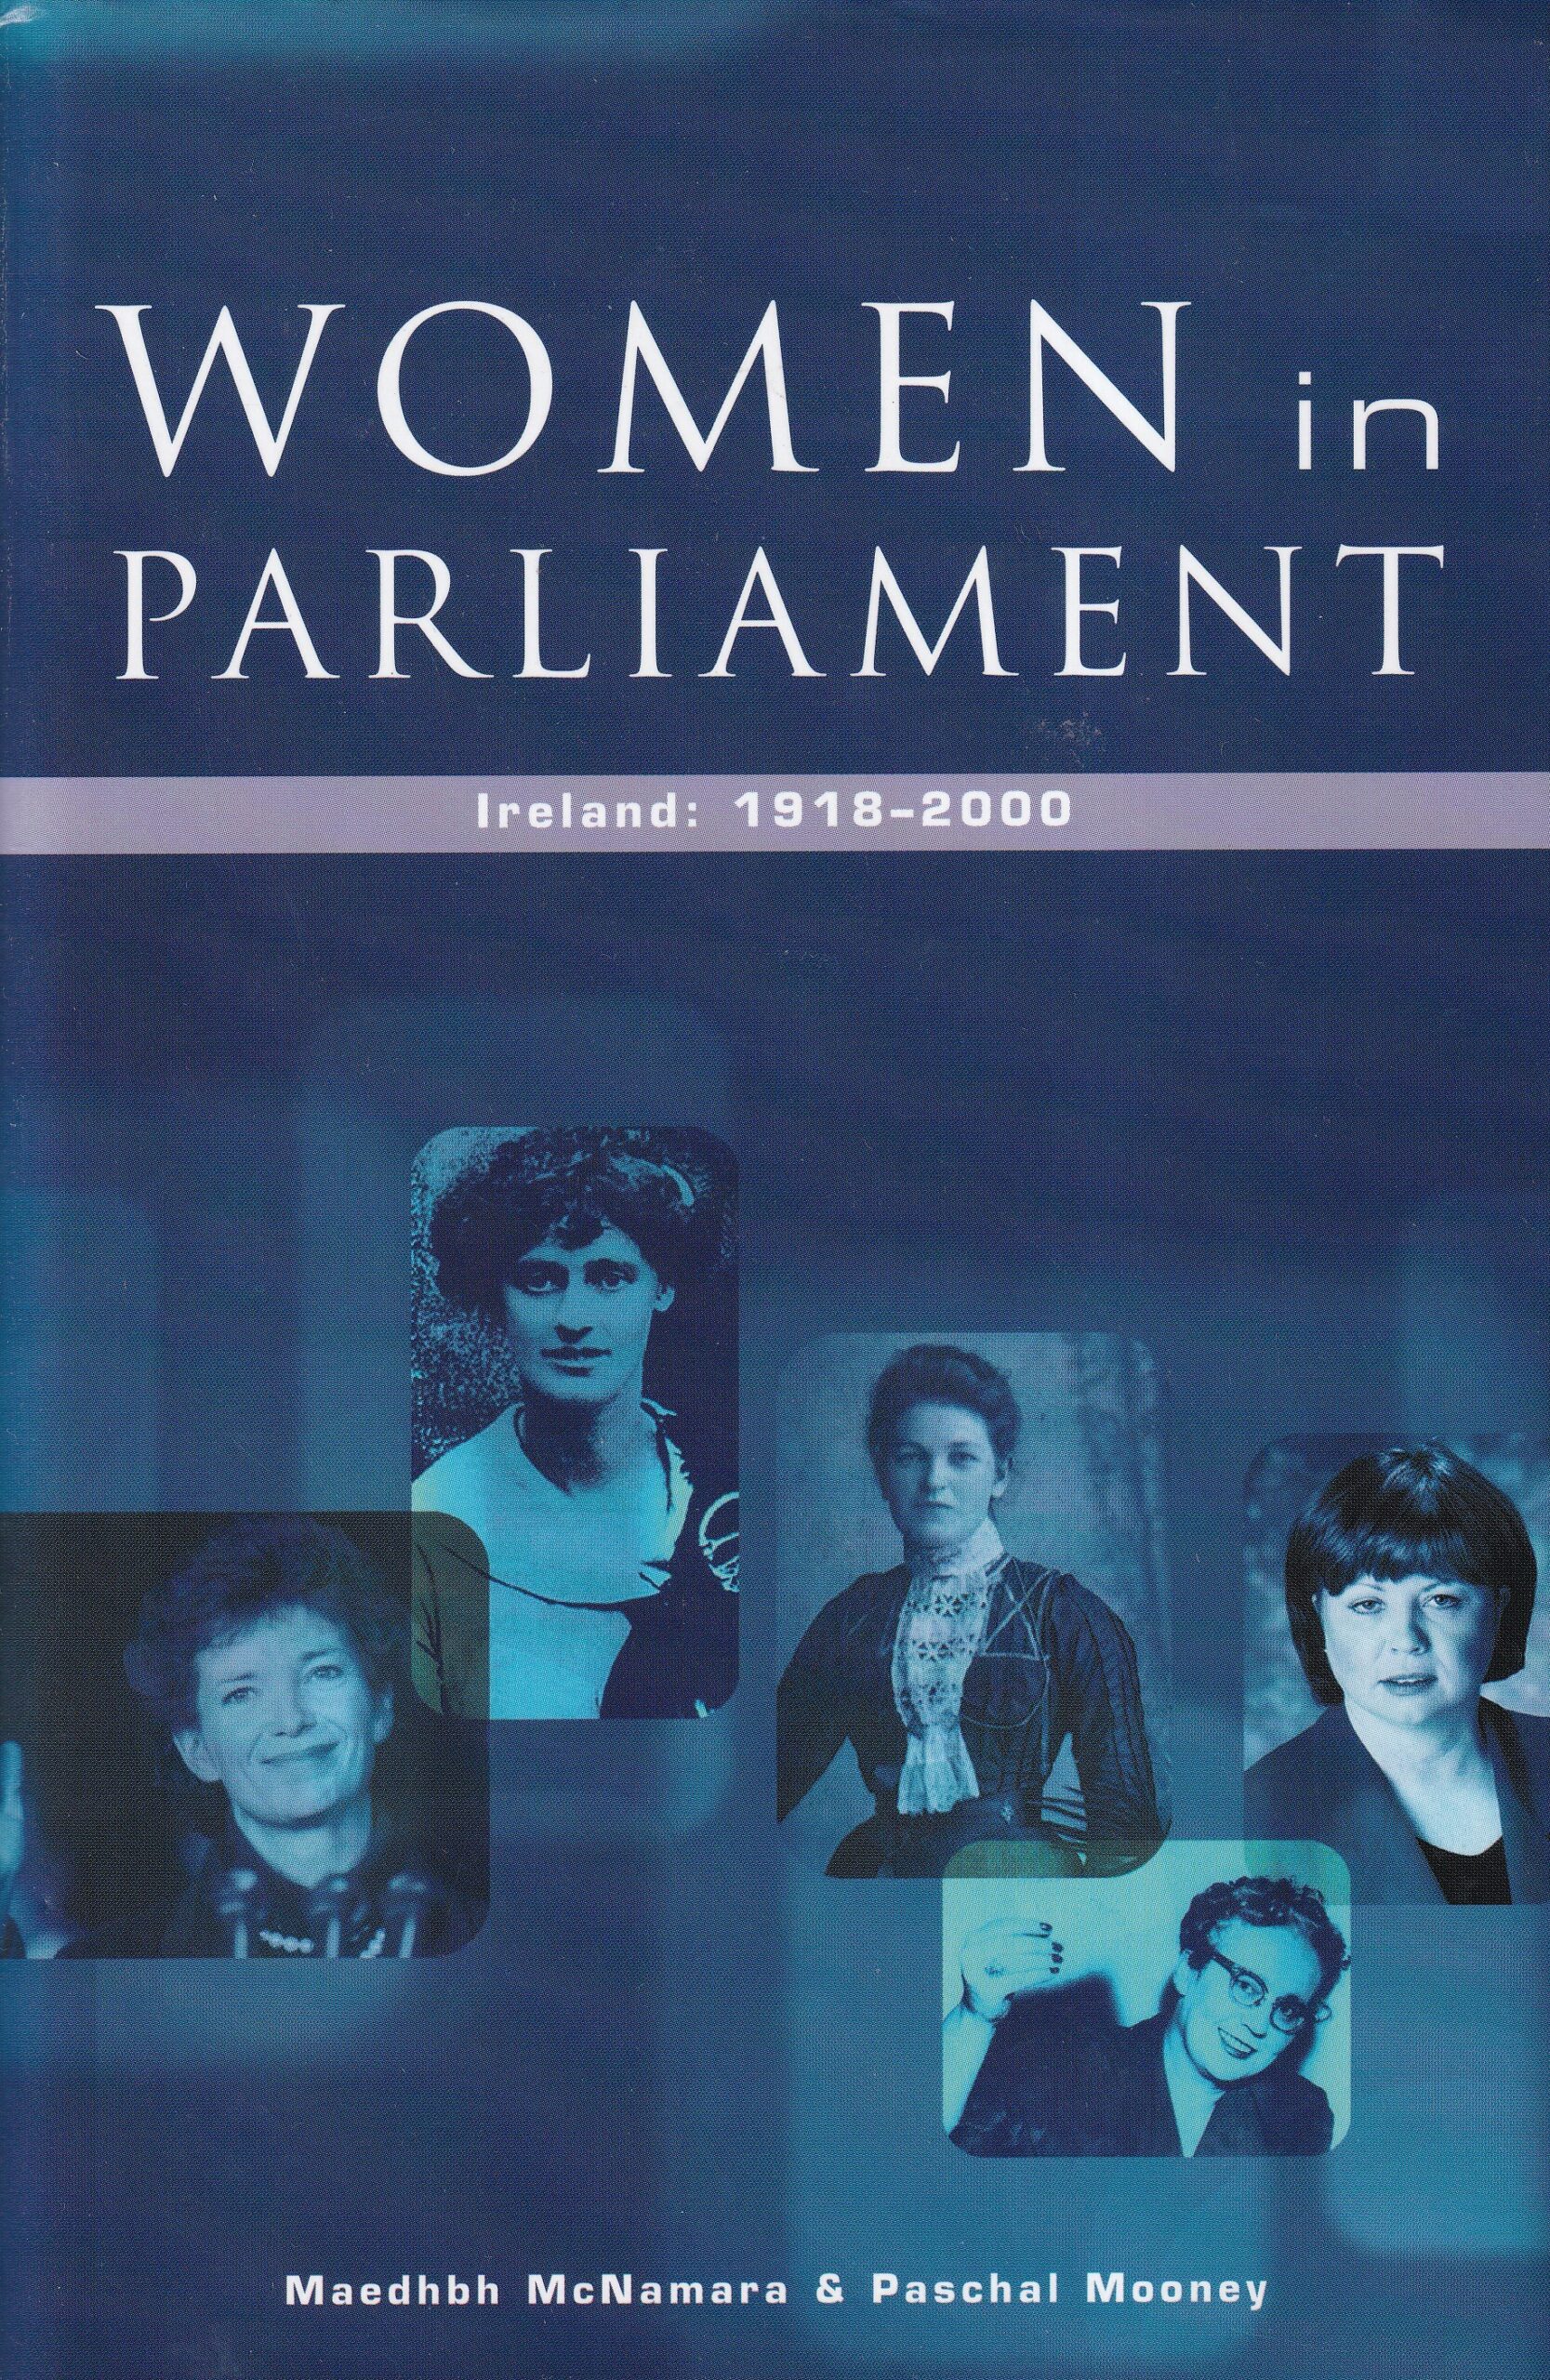 Women in Parliament: Ireland 1918-2000 by Maedhbh McNamara and Paschal Mooney